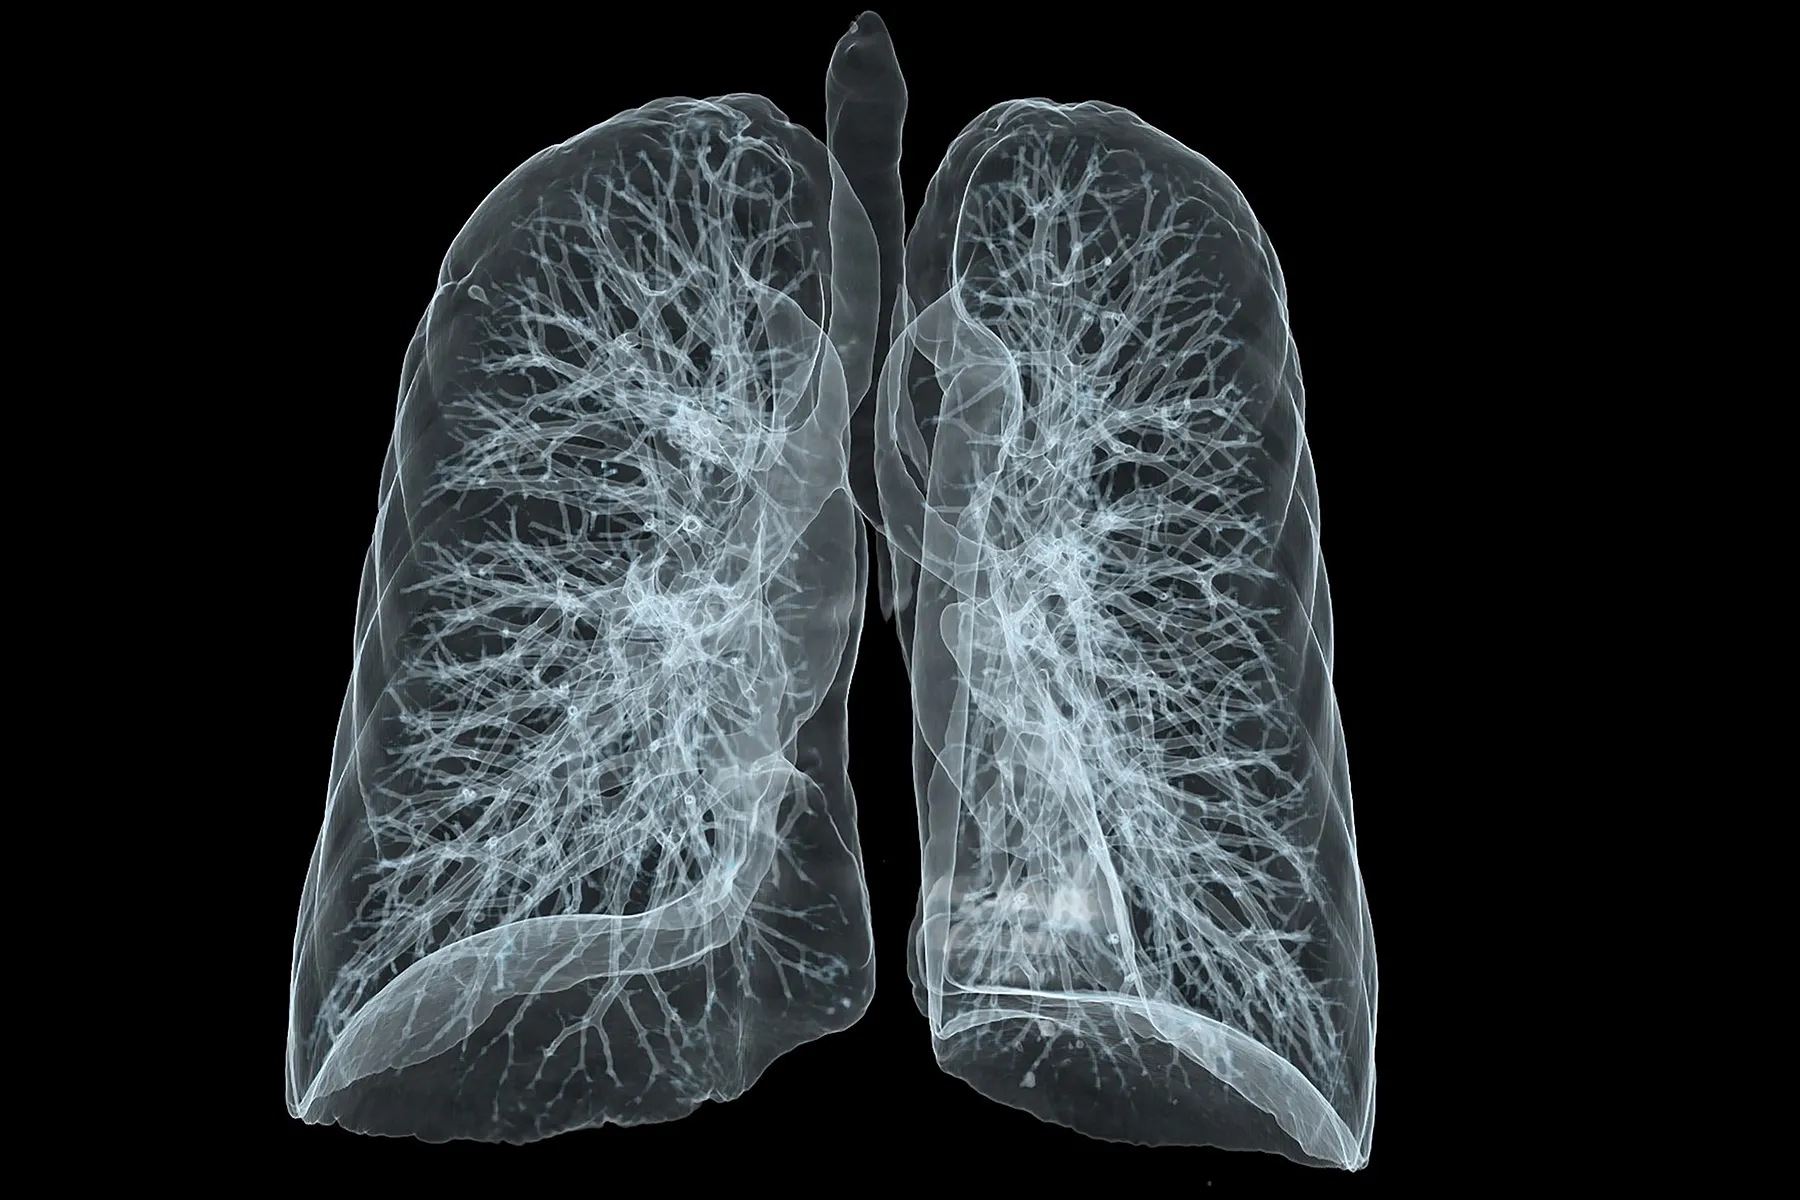 A CT scan of someone's lungs